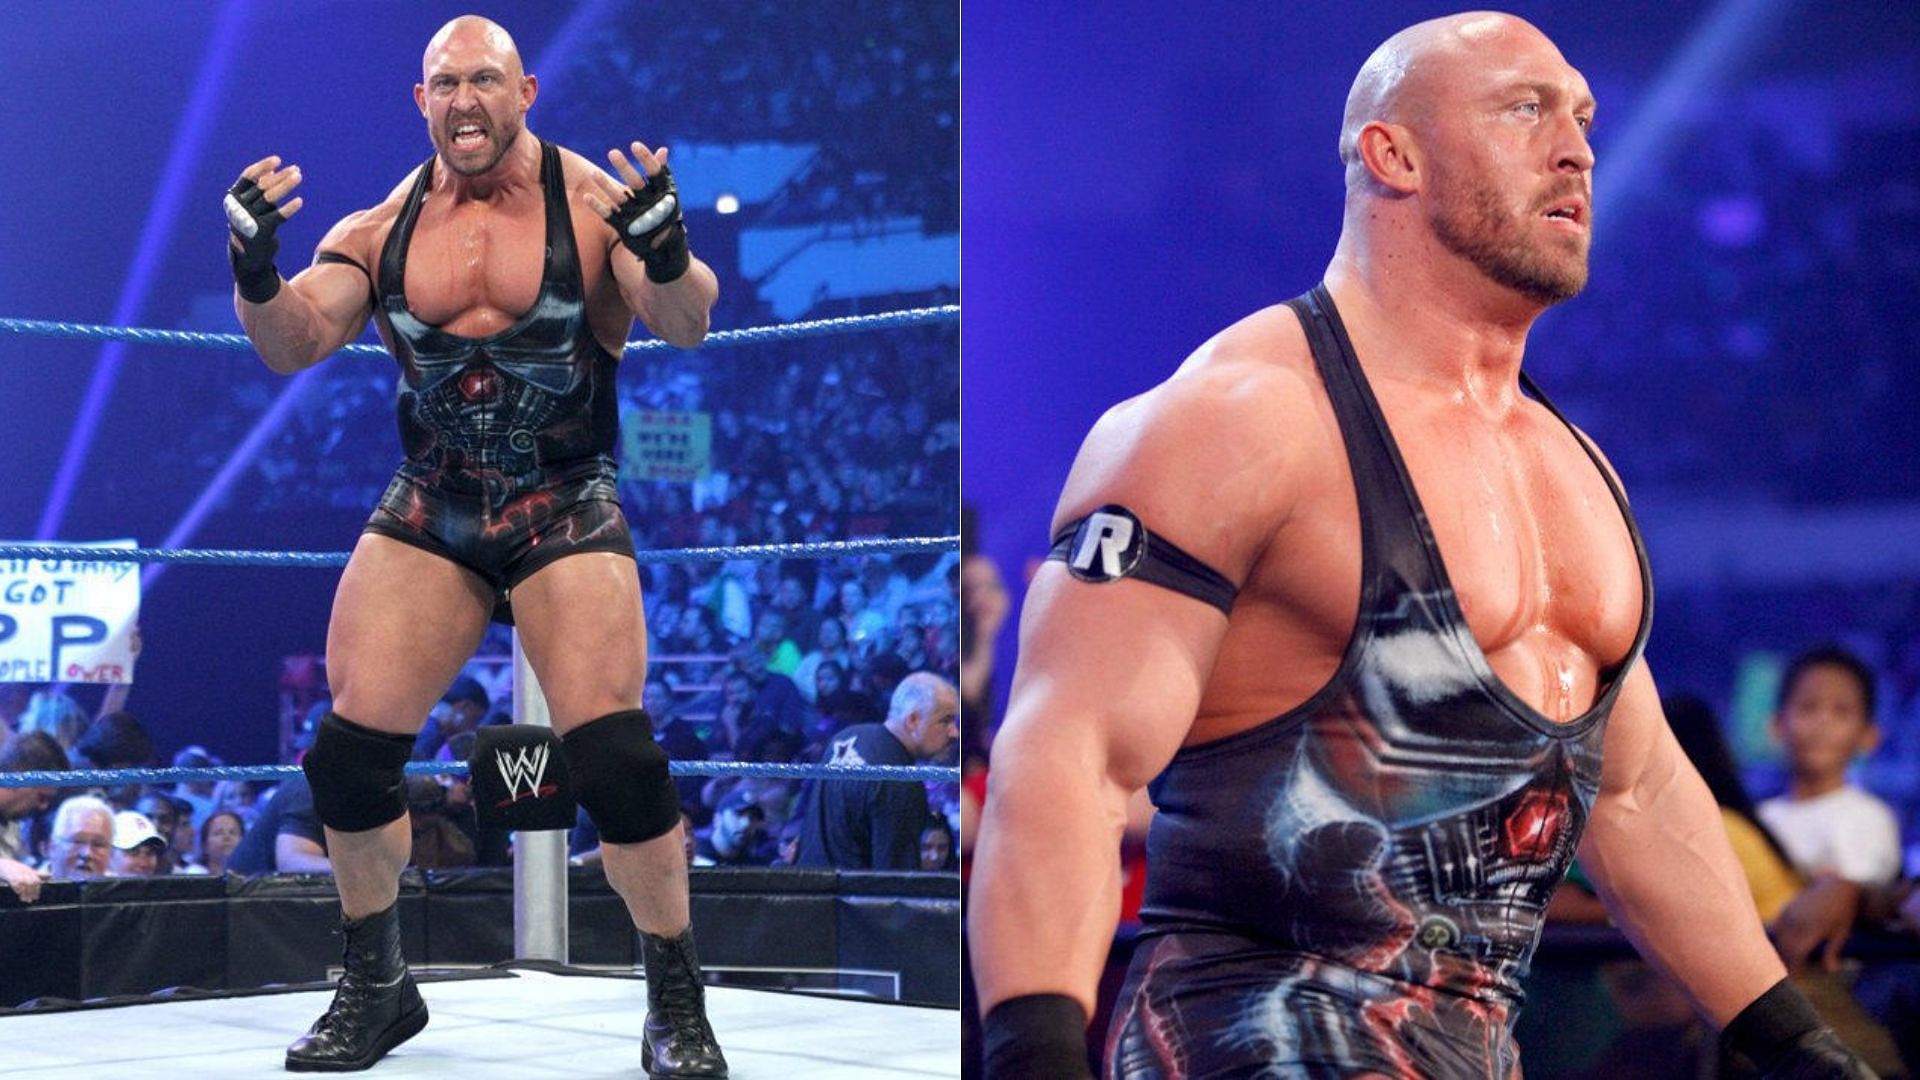 Ryback has not worked for WWE since 2016